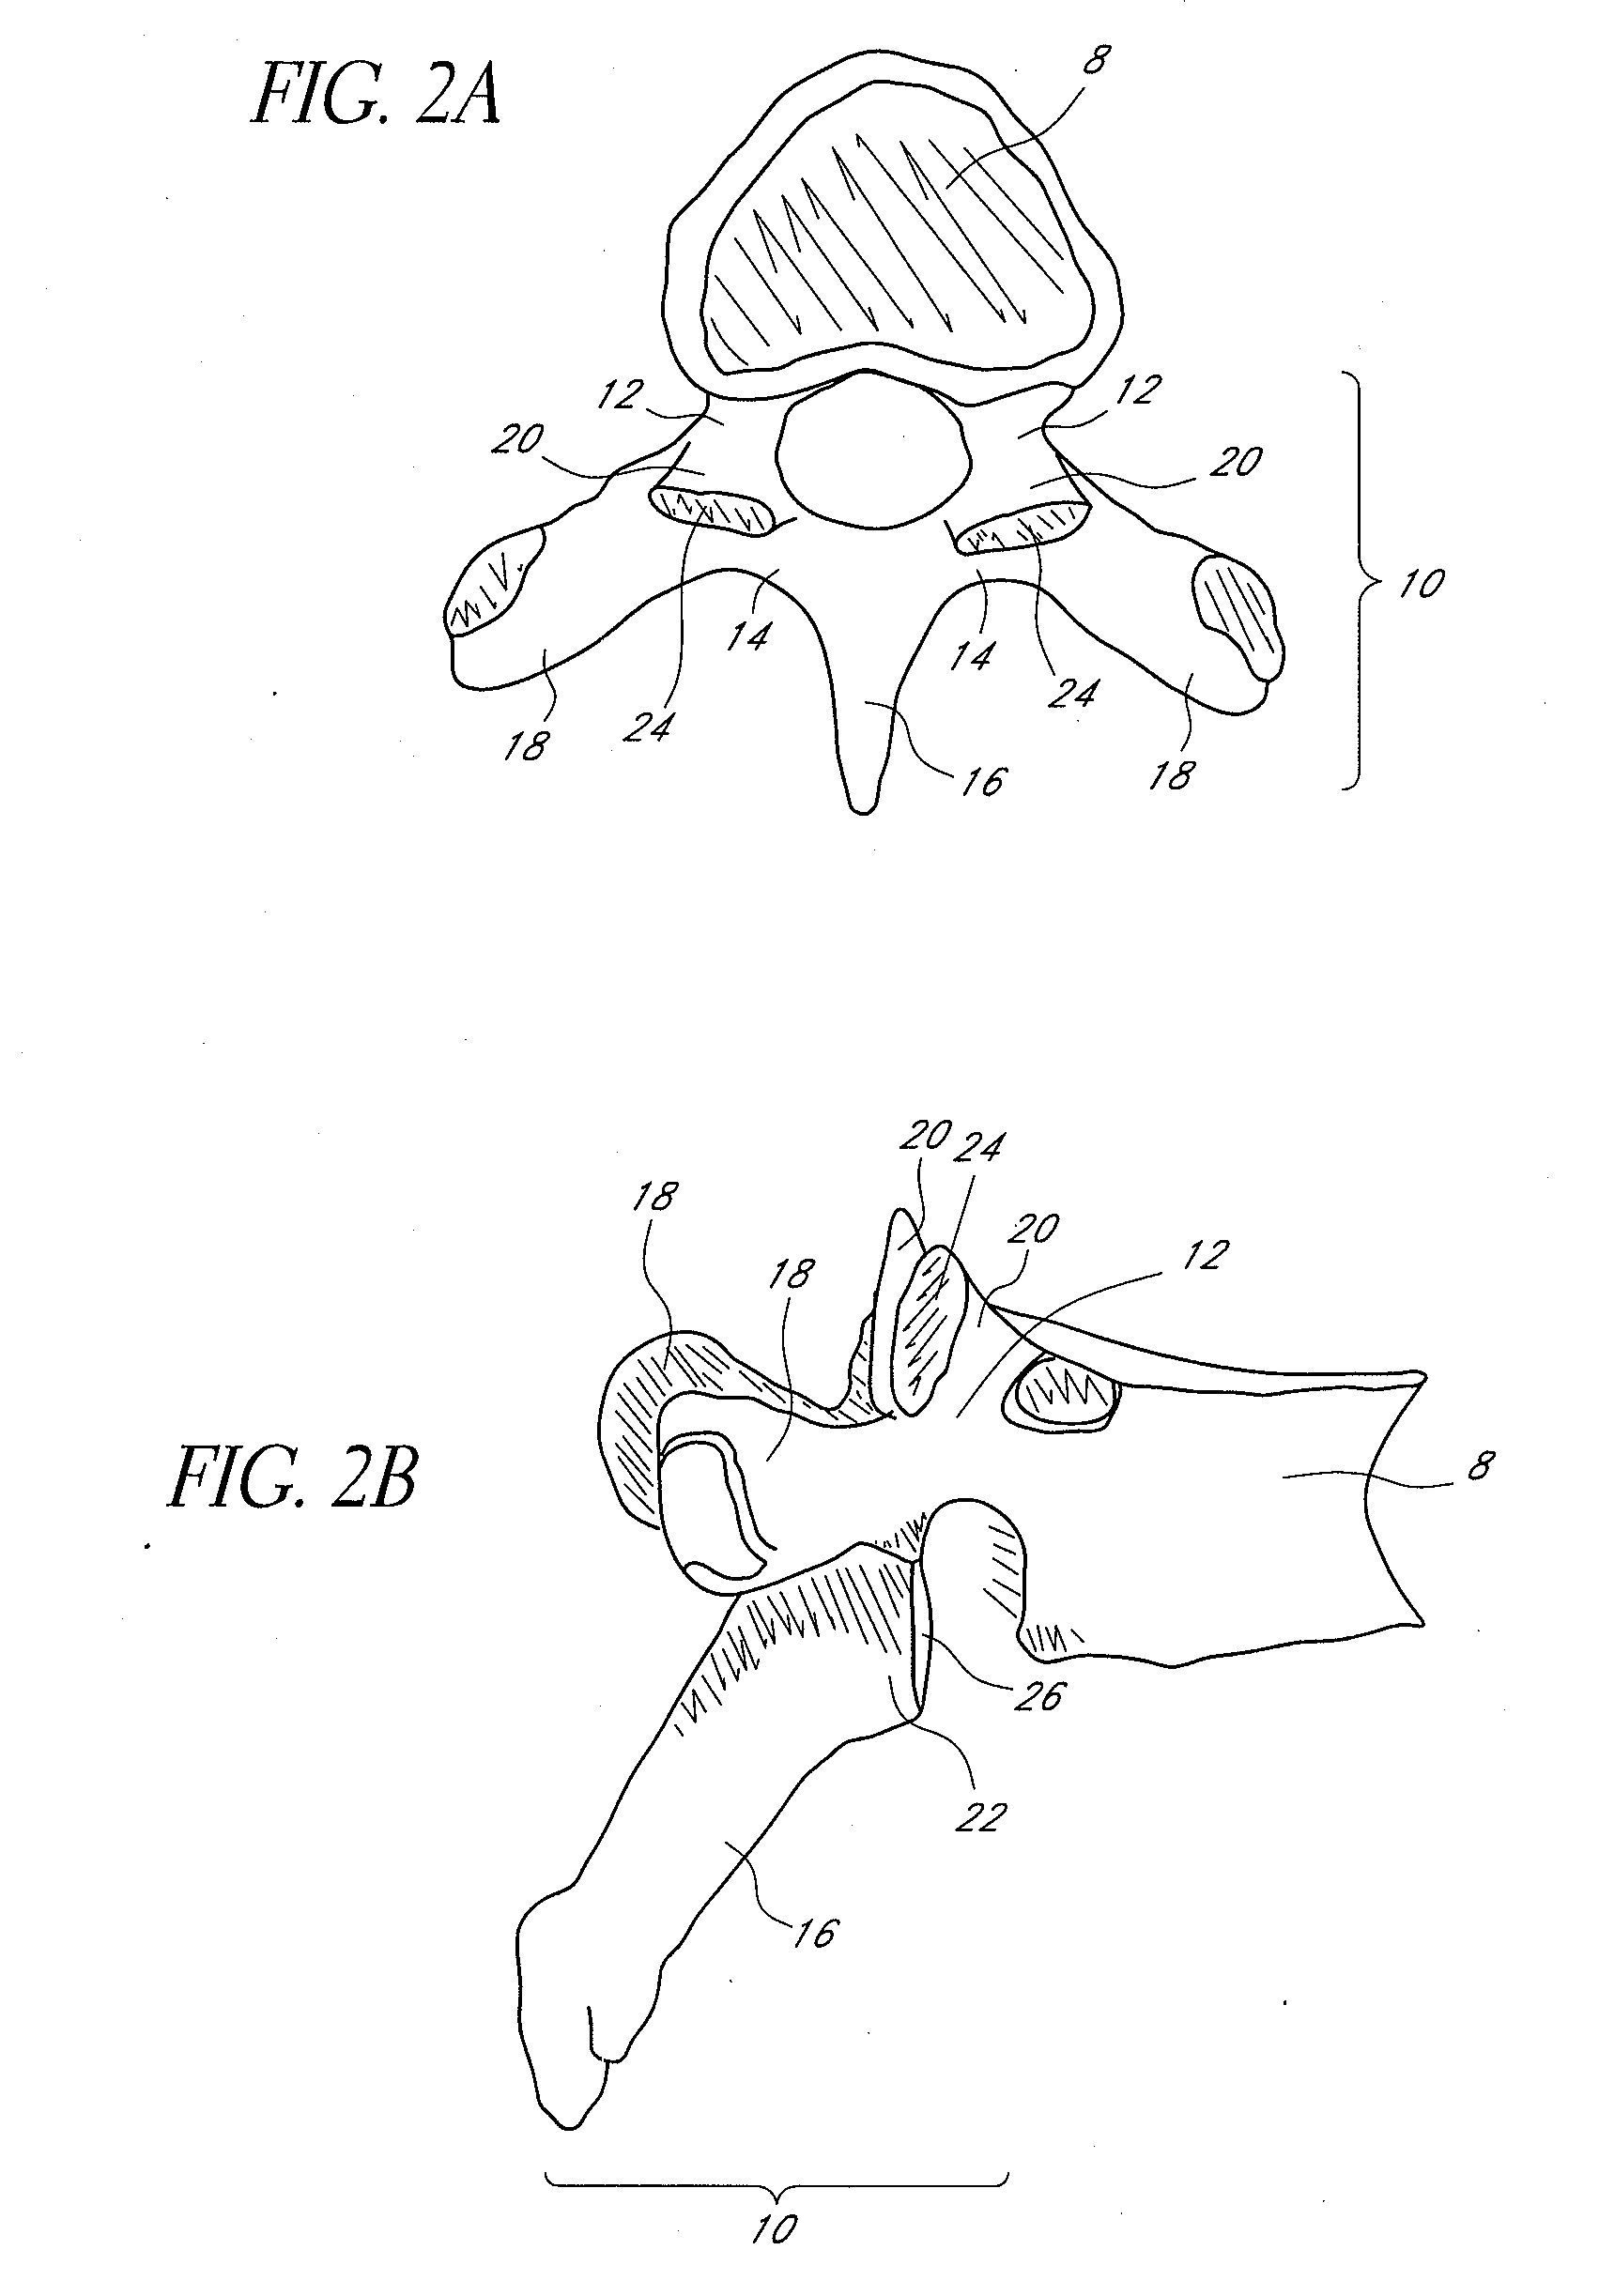 Vertebral facet joint prosthesis and method of fixation